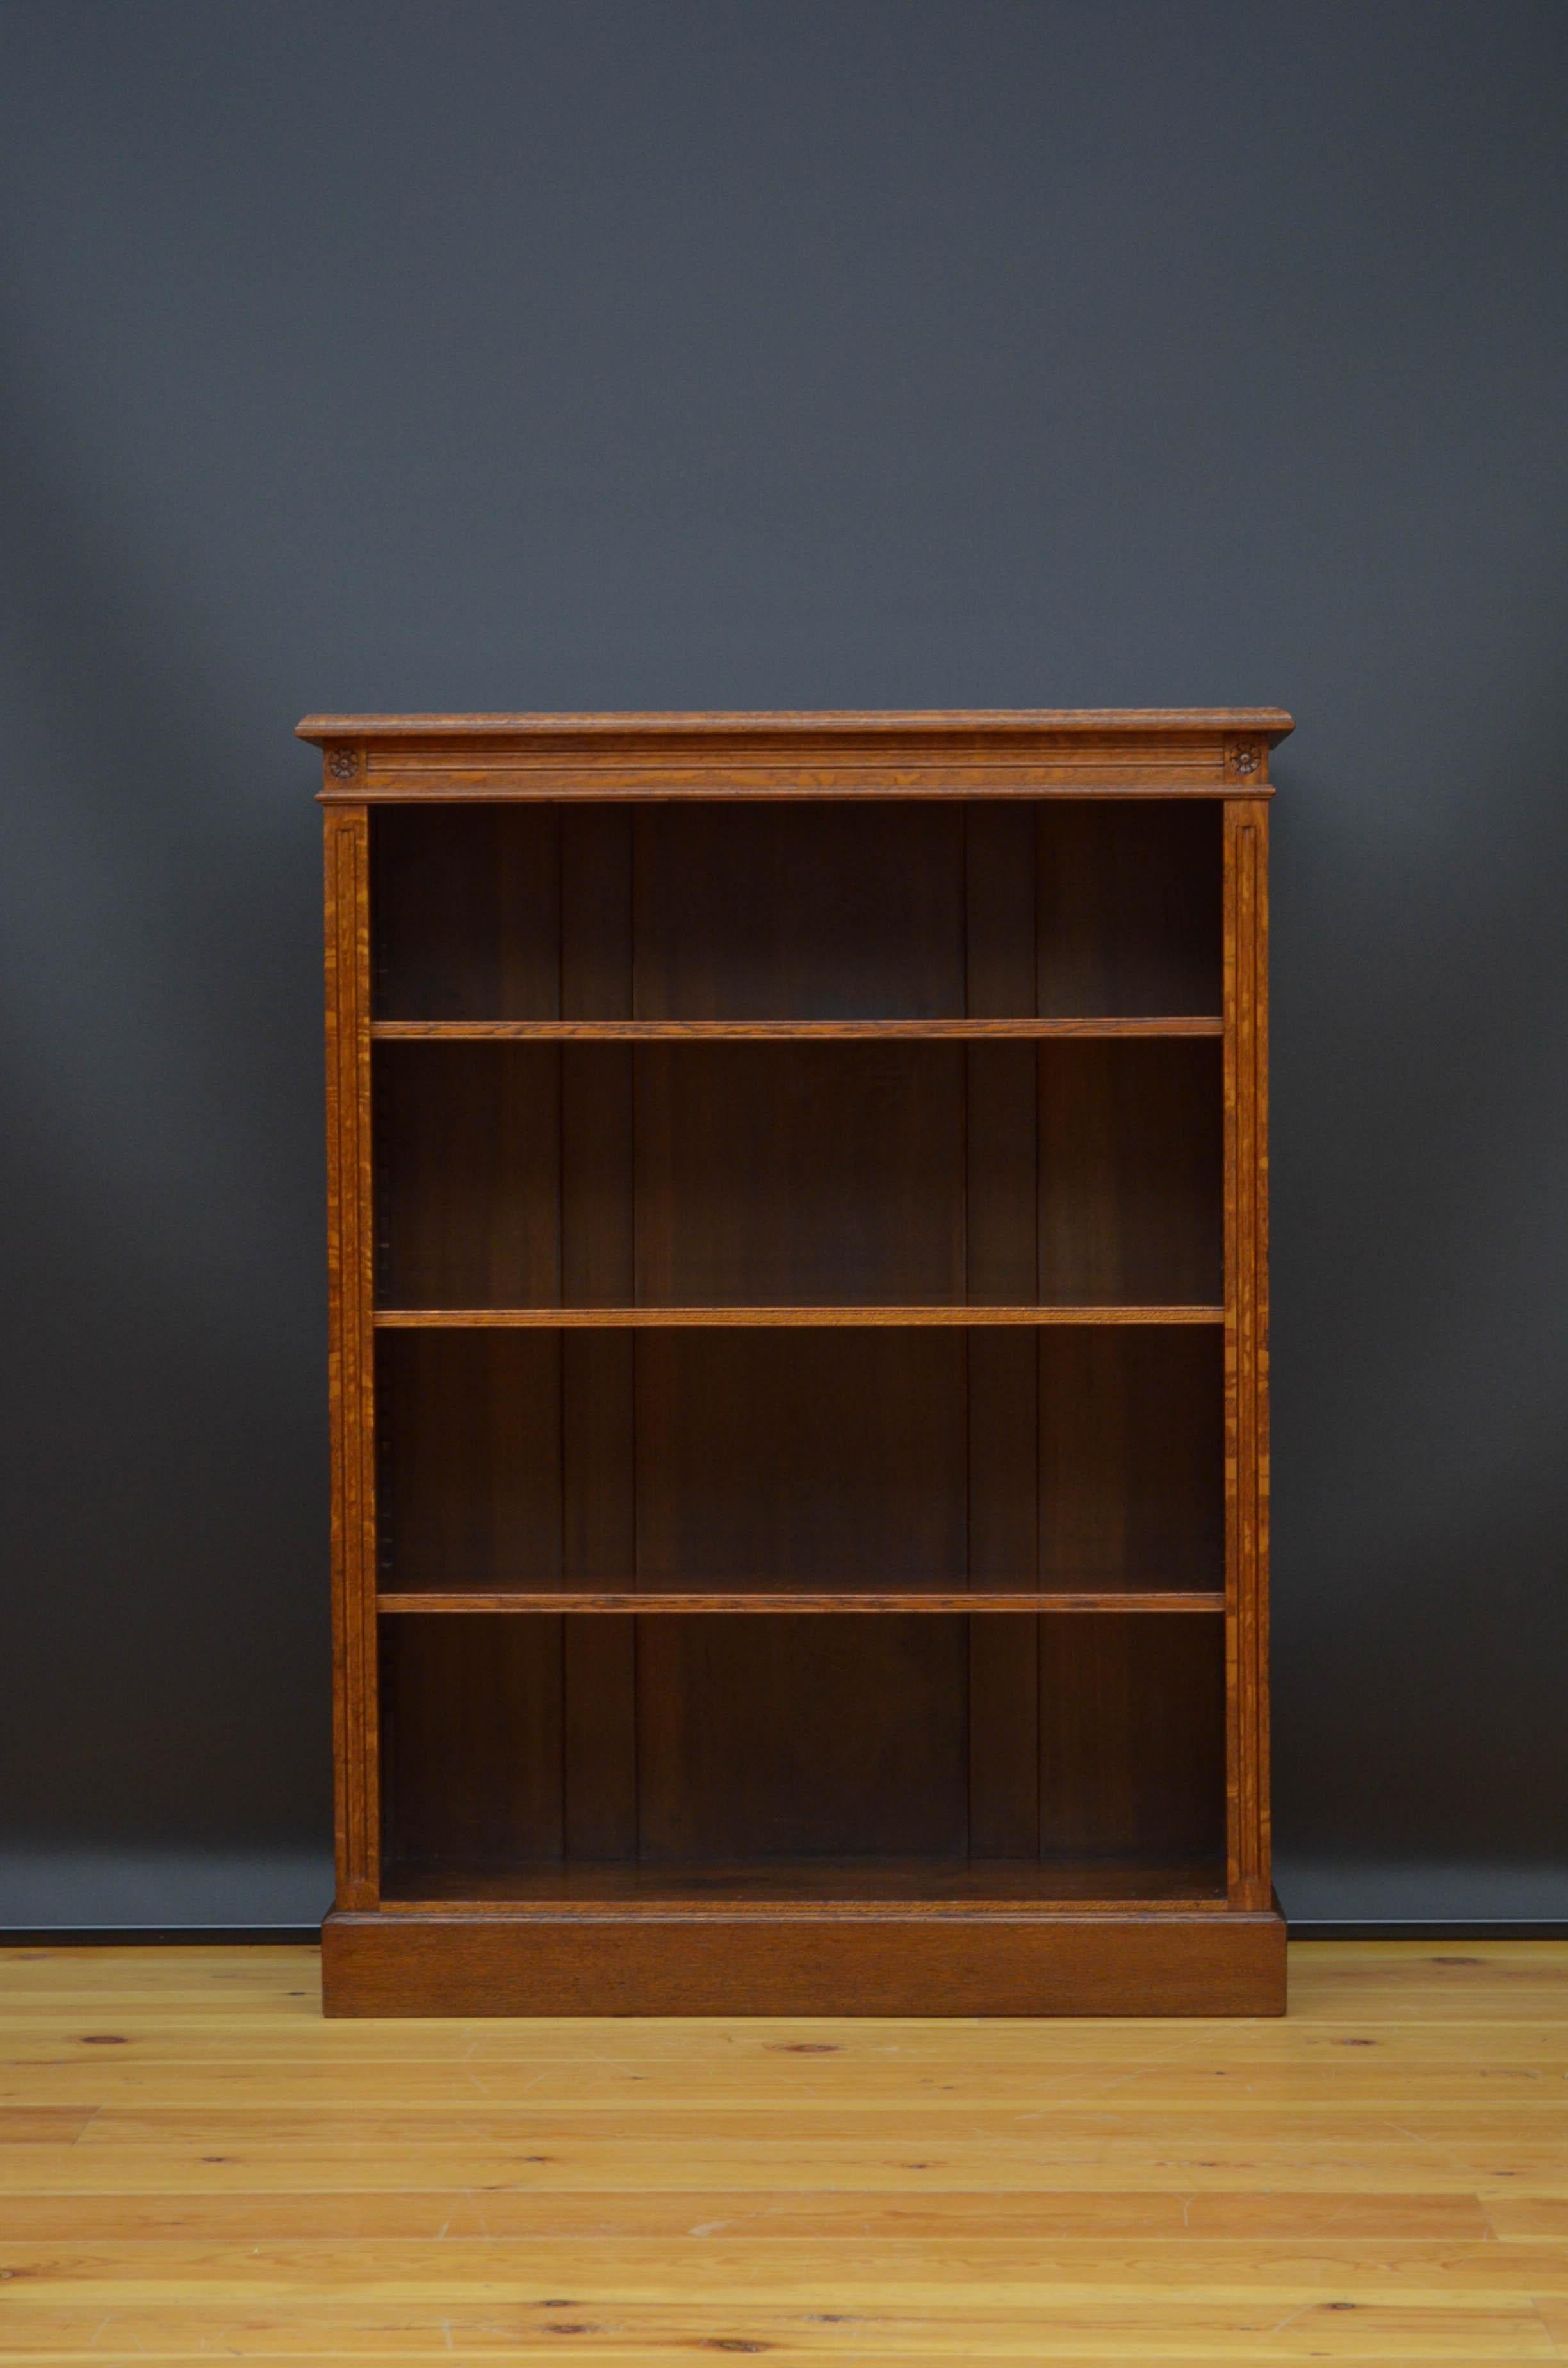 J04 Late Victorian open bookcase in solid oak, having oblong top above reeded frieze with carved paterae and three height adjustable shelves flanked by reeded pilasters, all standing on plinth base. This antique bookcase has been syamthetically